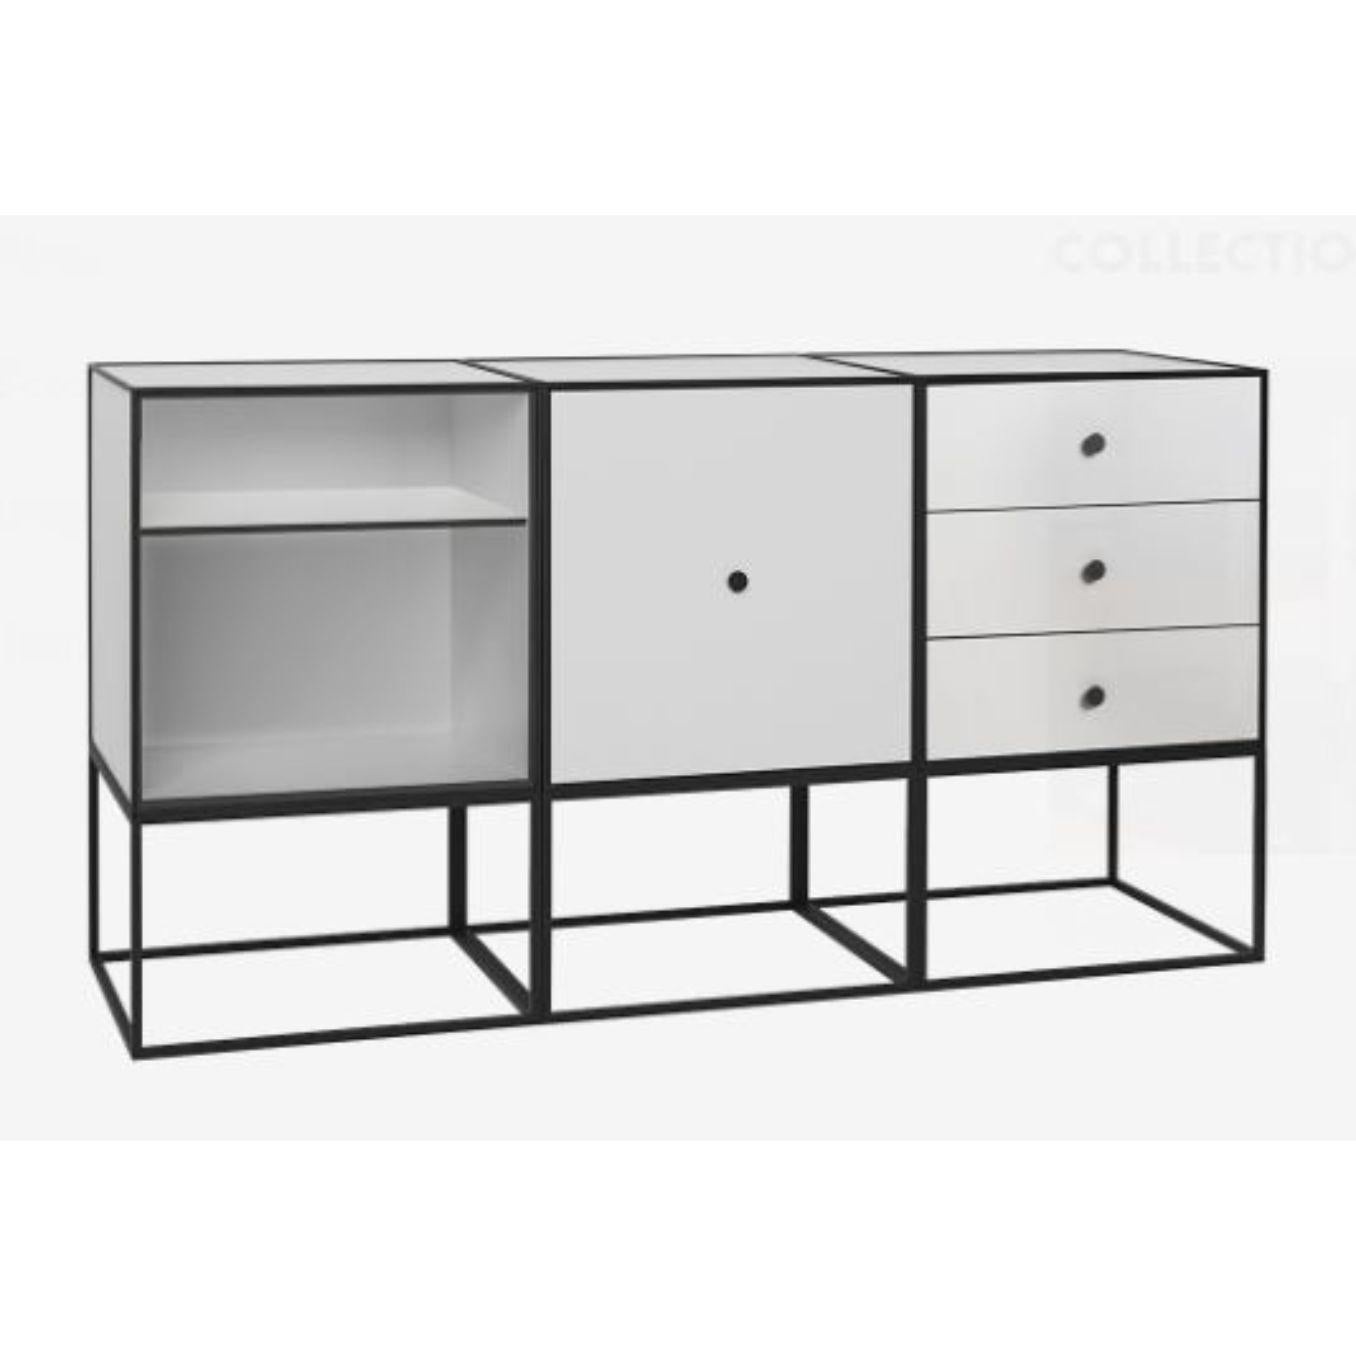 49 white frame sideboard trio by Lassen.
Dimensions: D 147 x W 42 x H 77 cm. 
Materials: Finér, Melamin, Melamine, Metal, Veneer.
Also available in different colors and dimensions. 
Weight: 88 Kg

By Lassen is a Danish design brand focused on